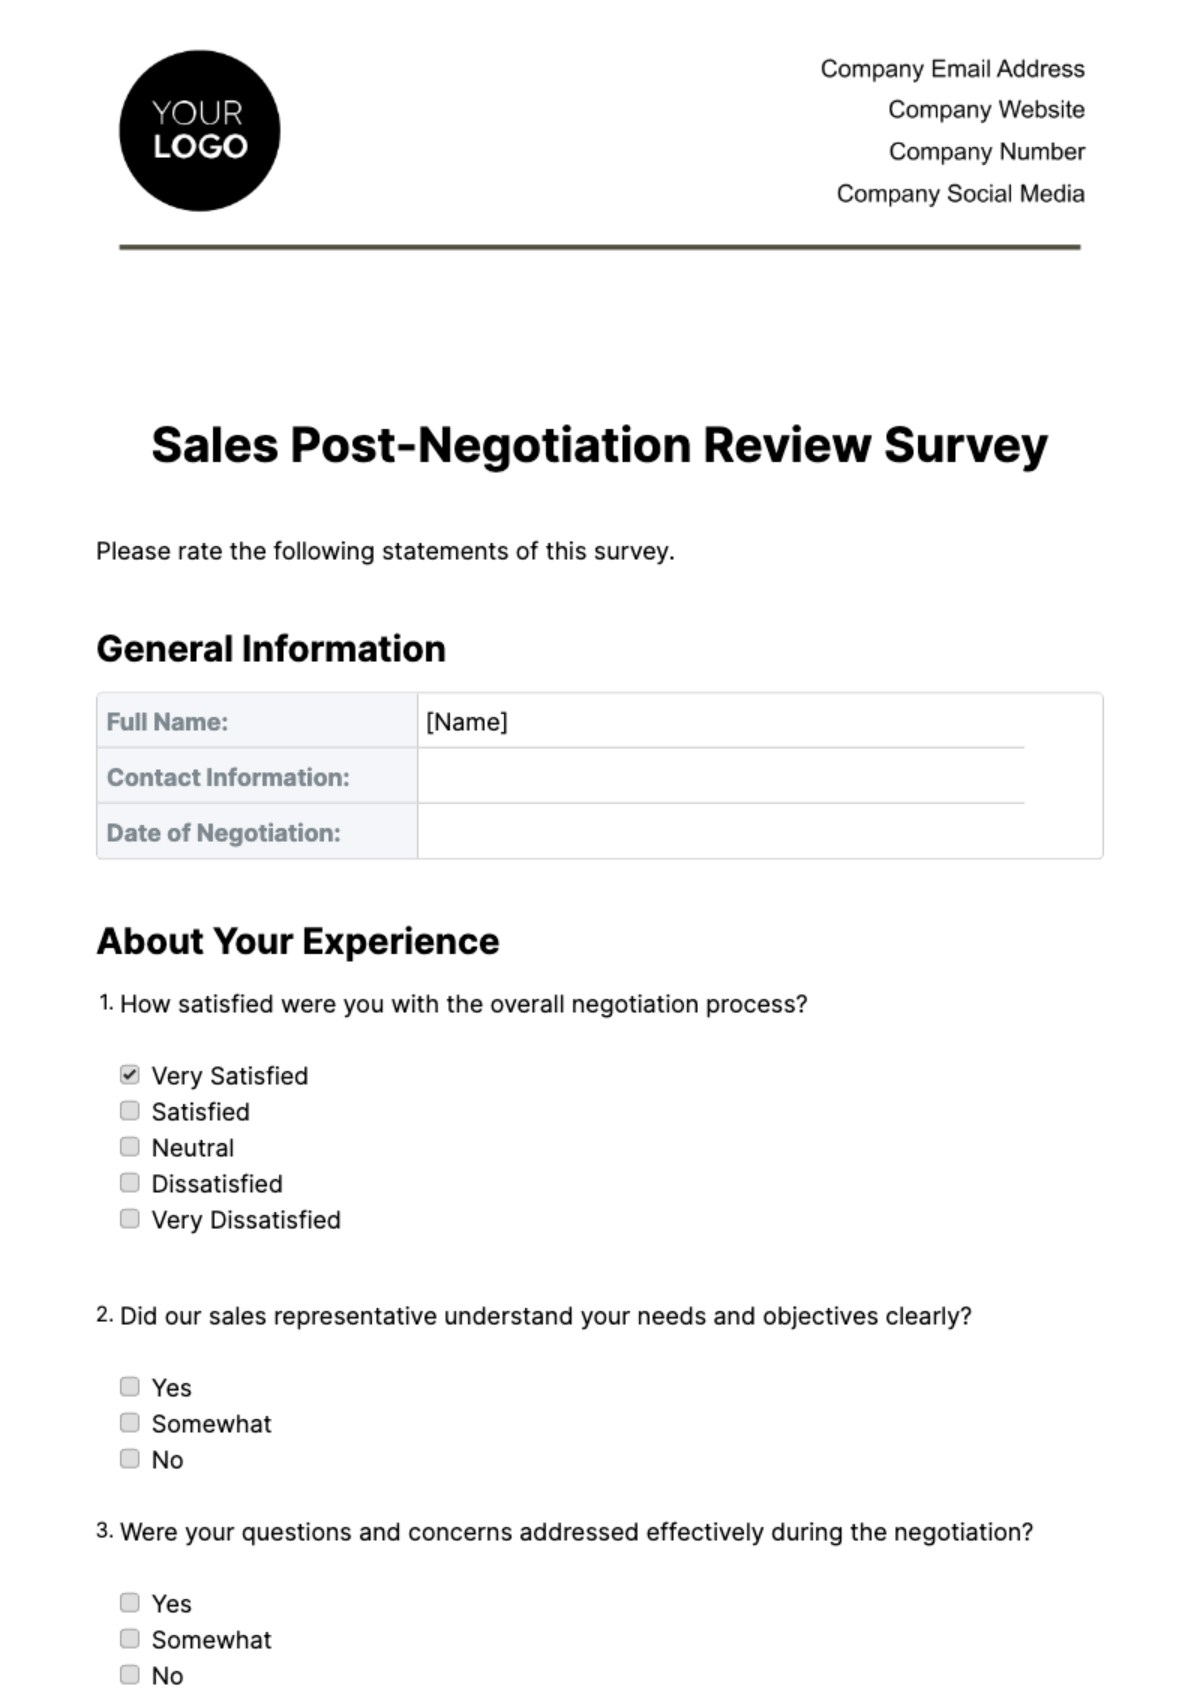 Free Sales Post-Negotiation Review Survey Template